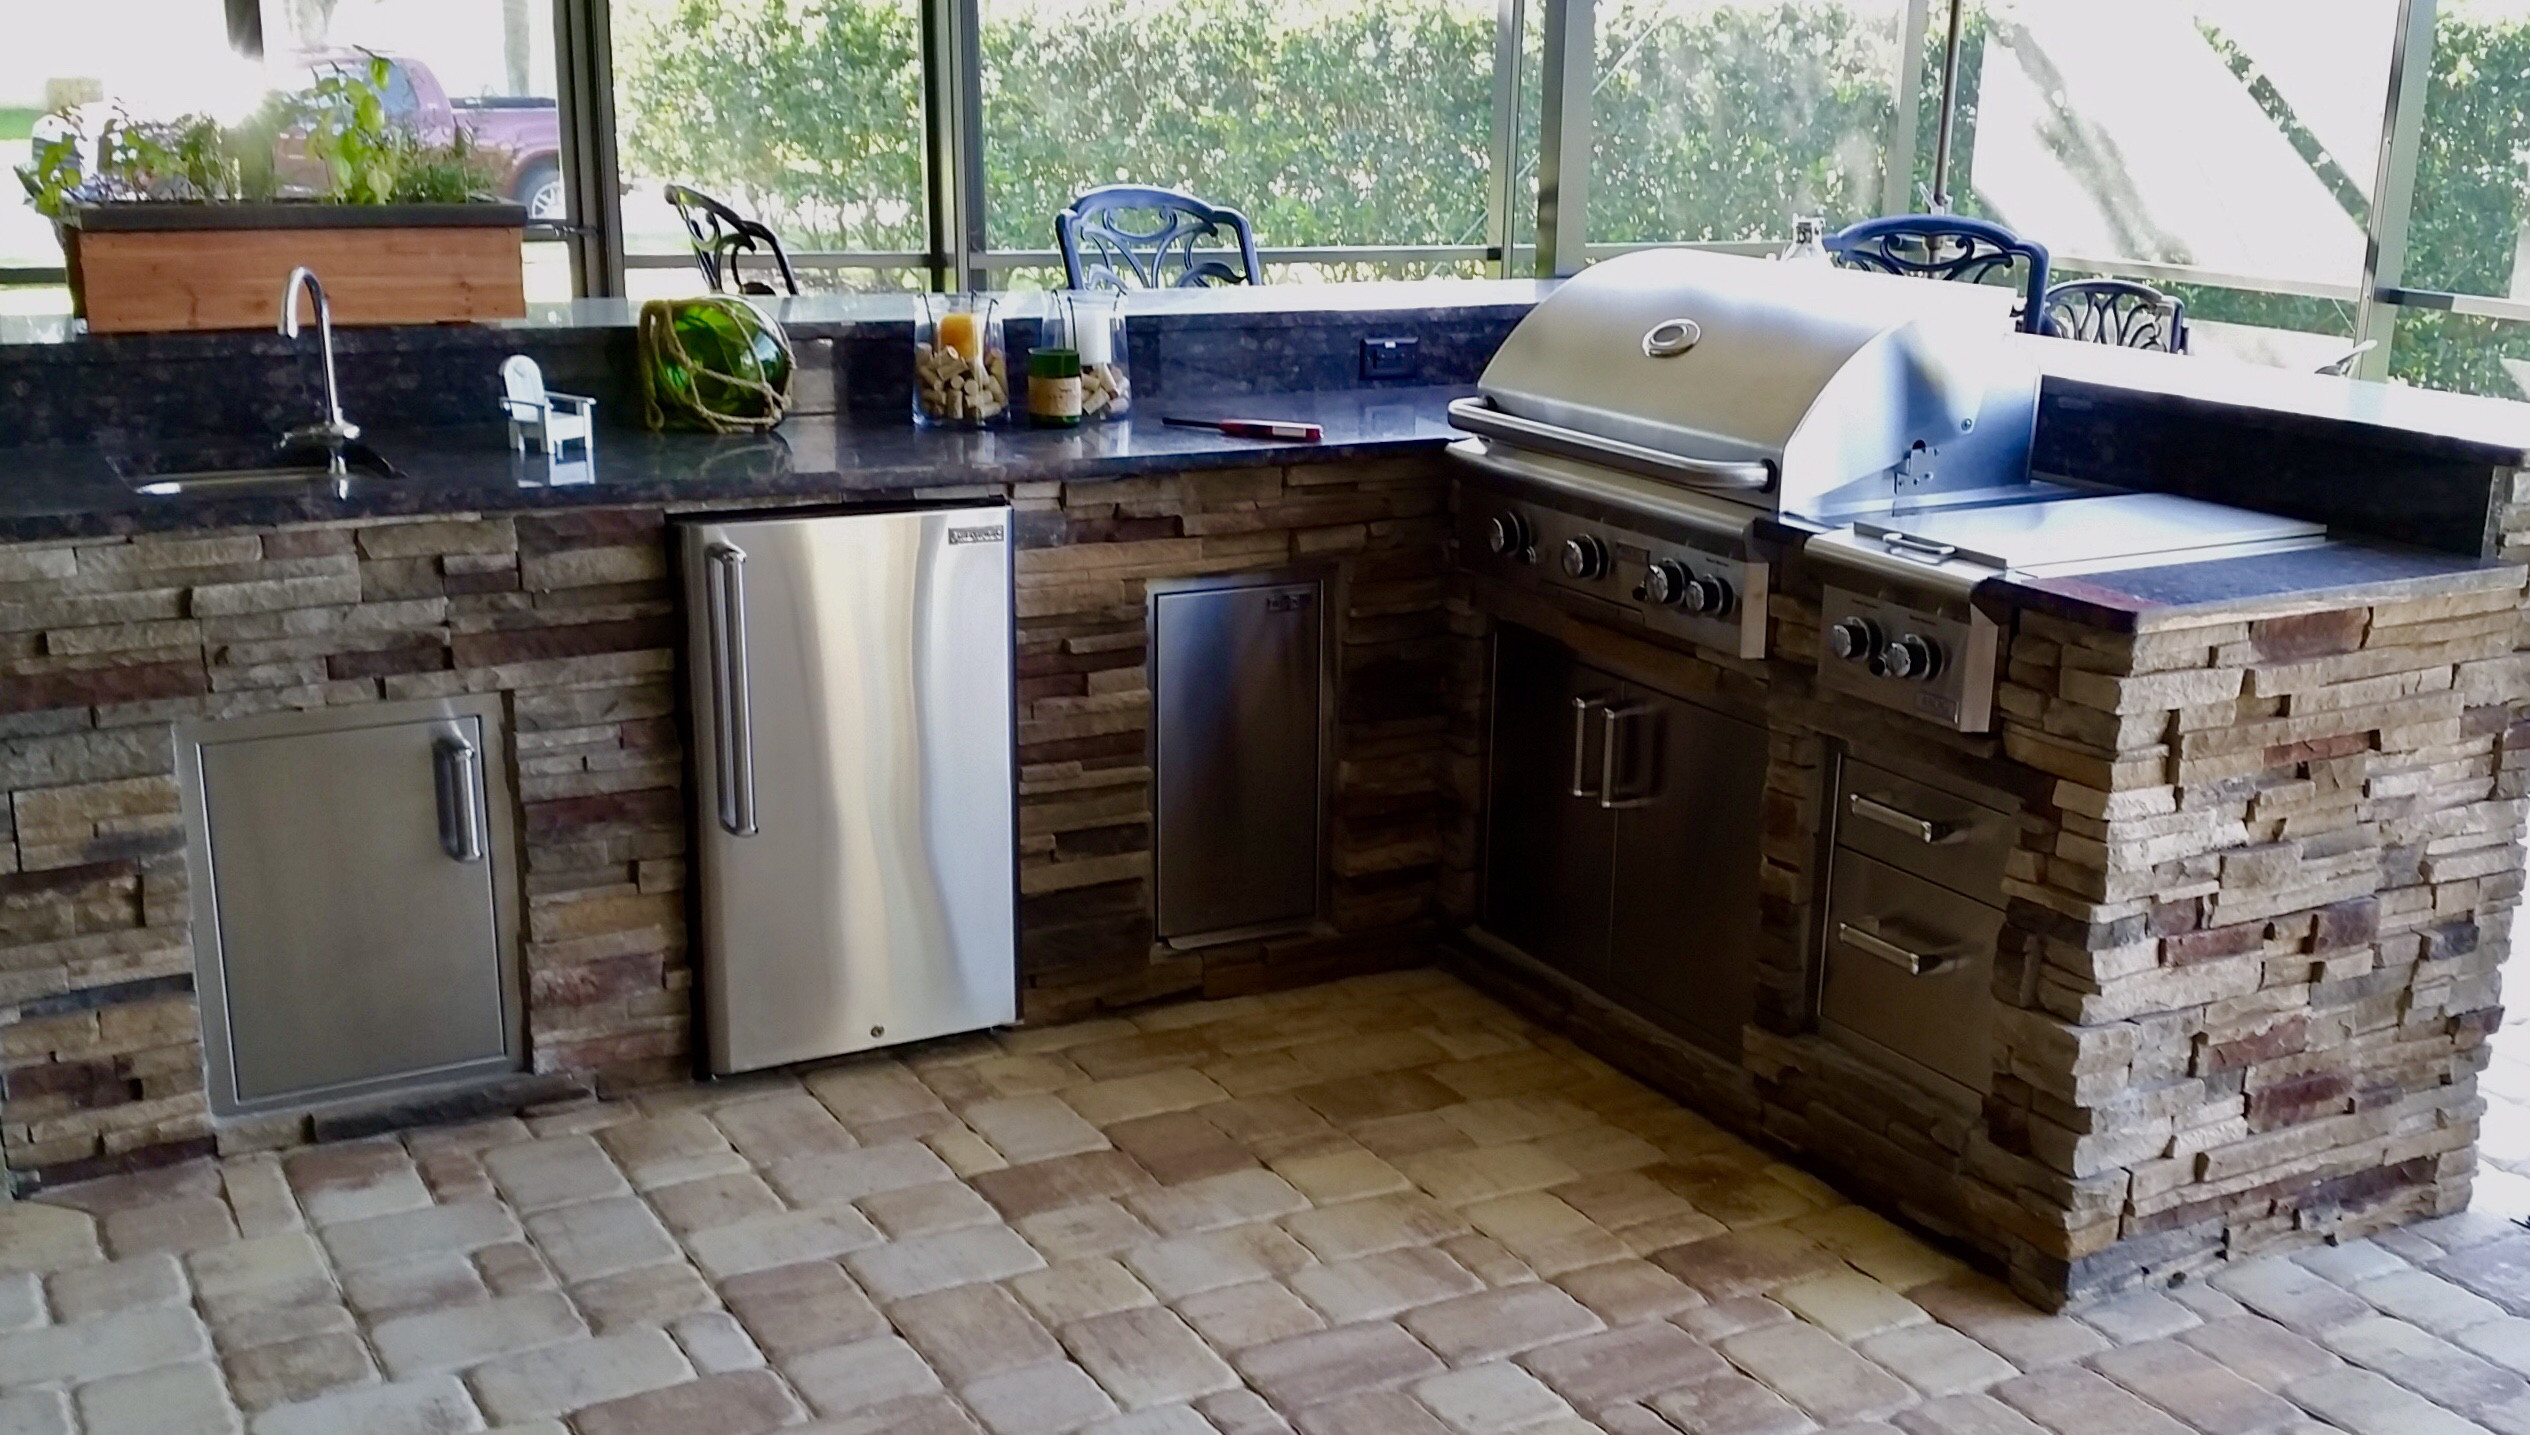 Outdoor Kitchen Appliances
 Do I Need Special Appliances for an Outdoor Kitchen